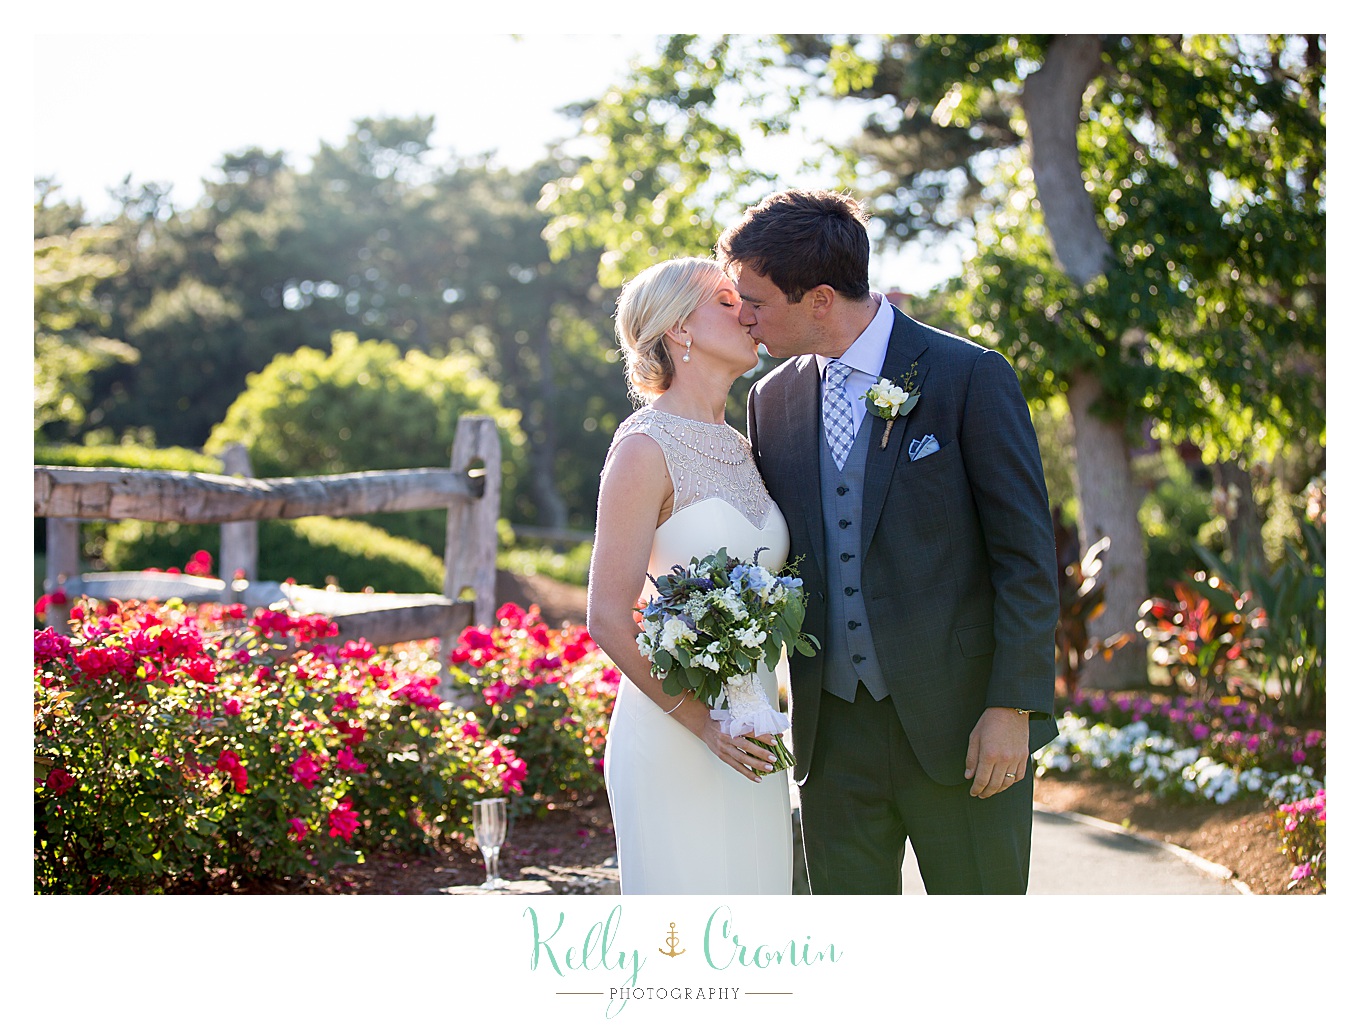 A couple kiss each other | Kelly Cronin Photography | Ocean Edge Resort and Golf Club